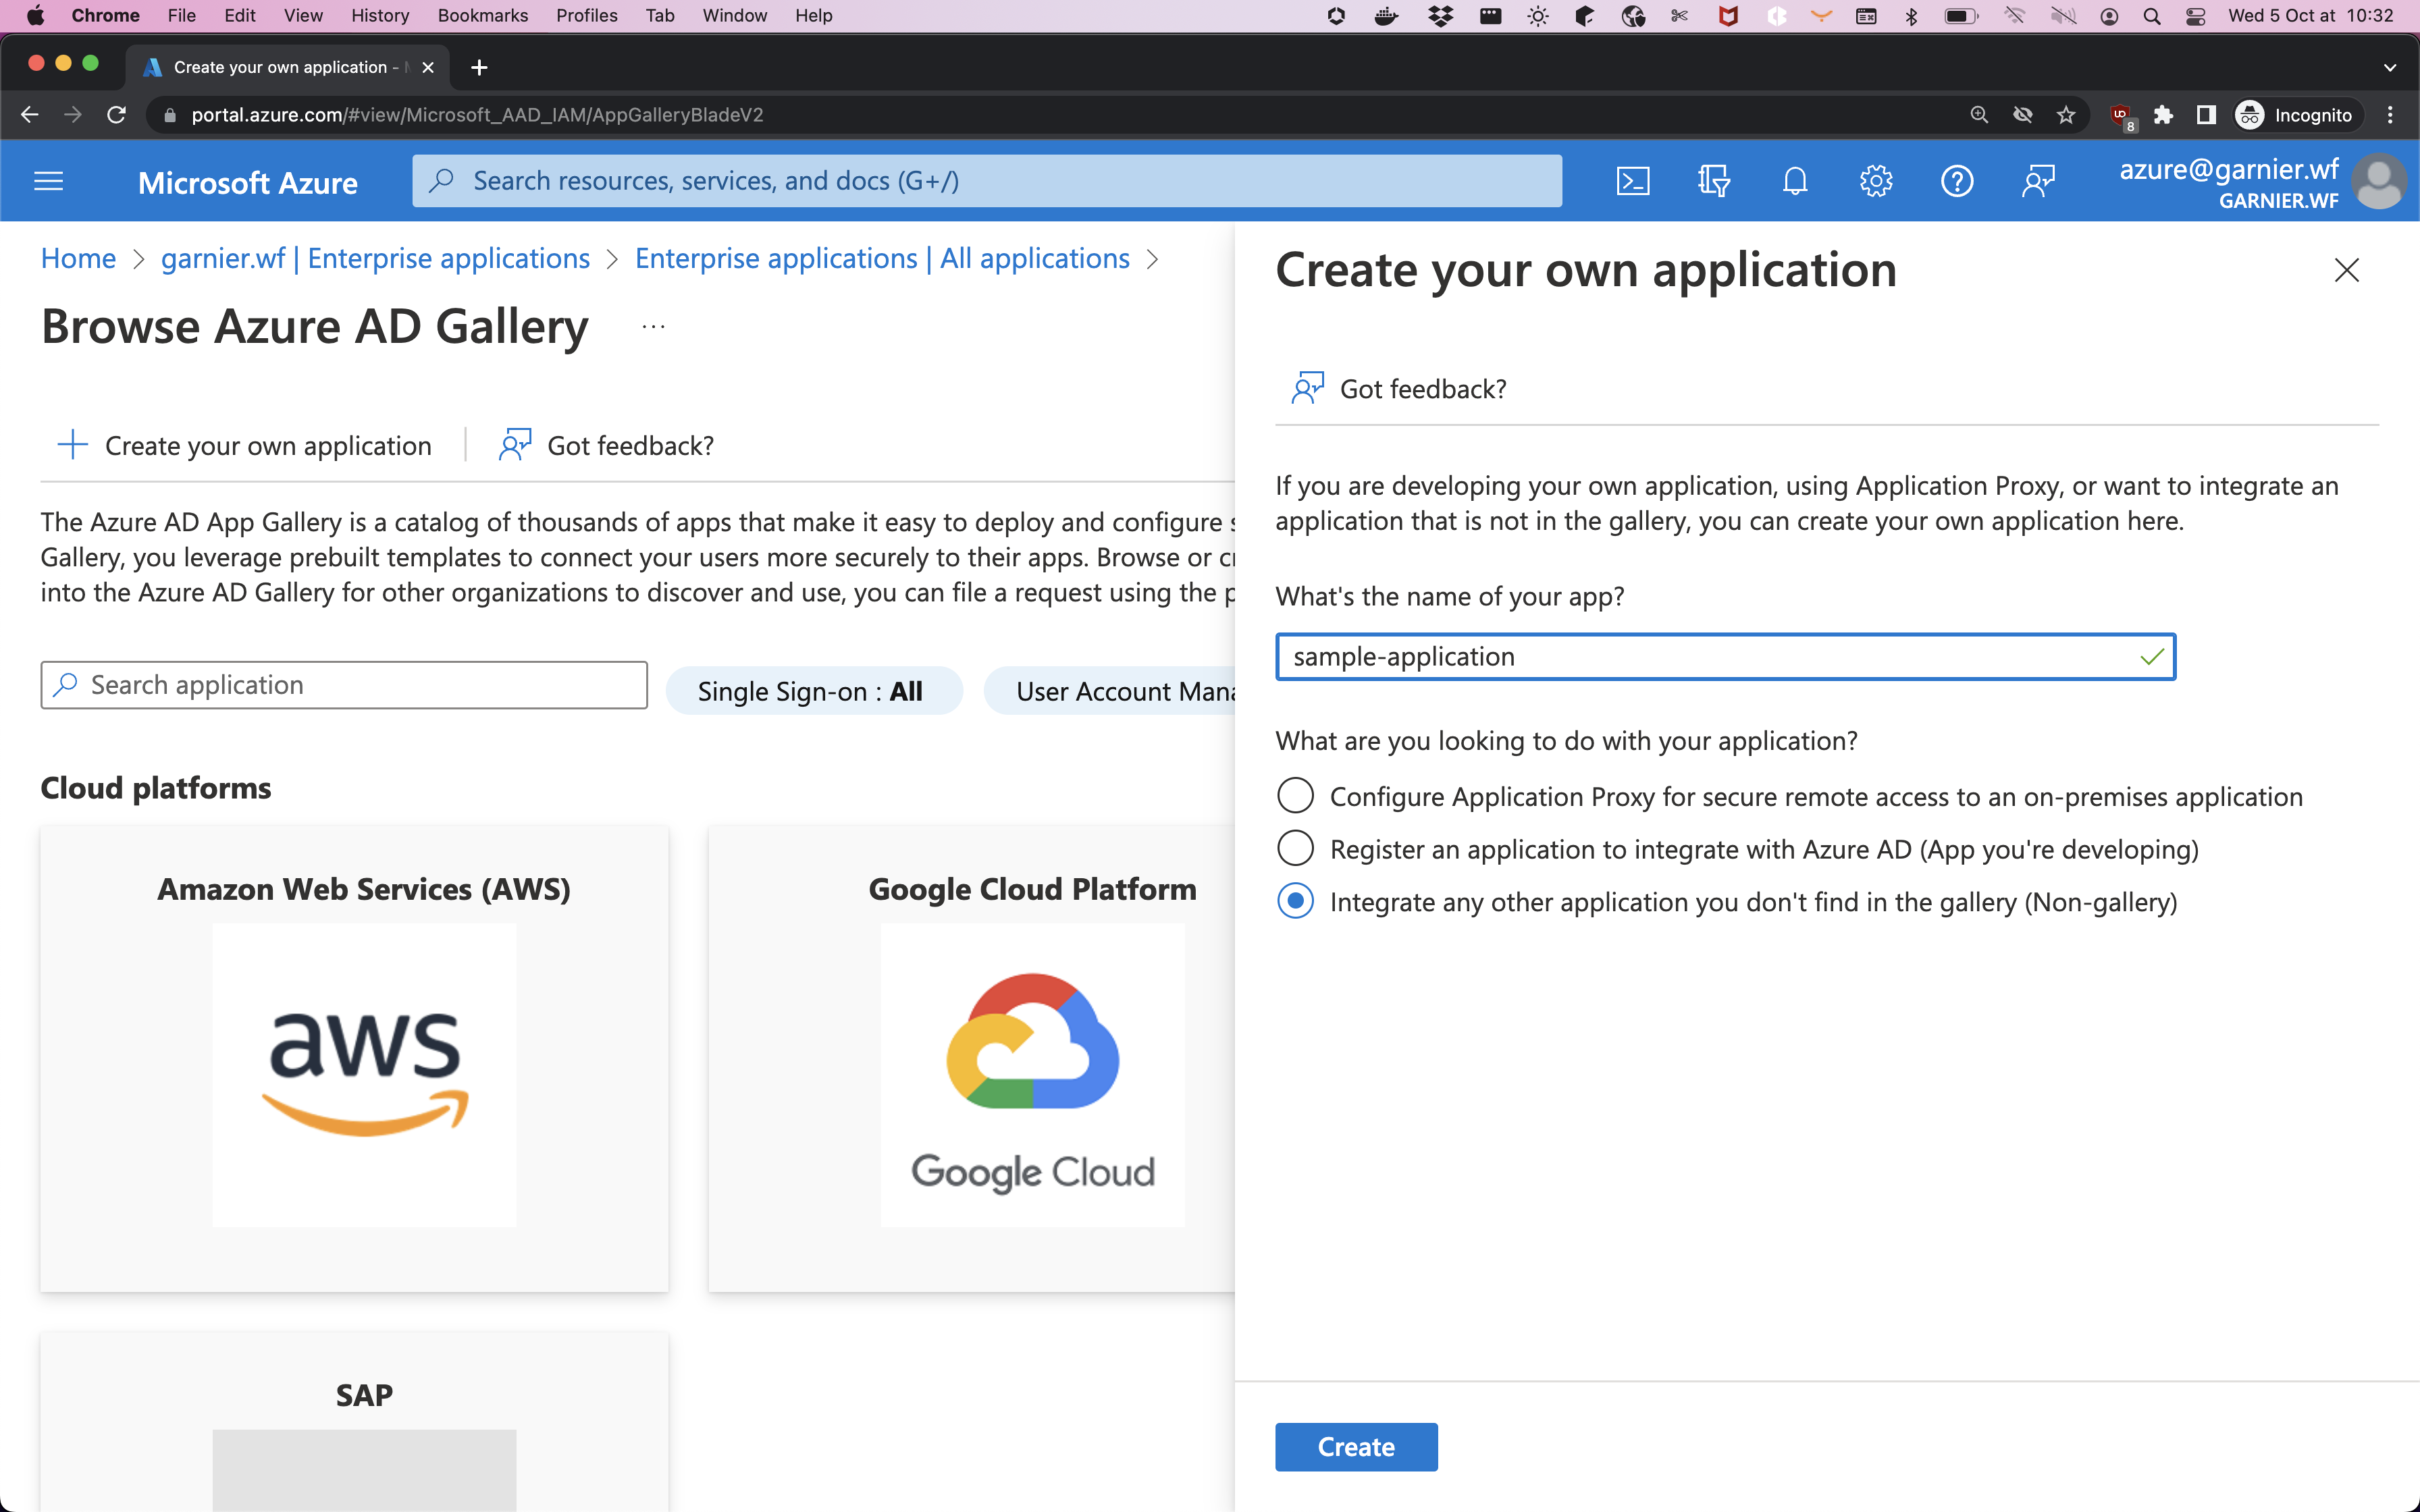 The Create your own application section in Microsoft Entra ID.